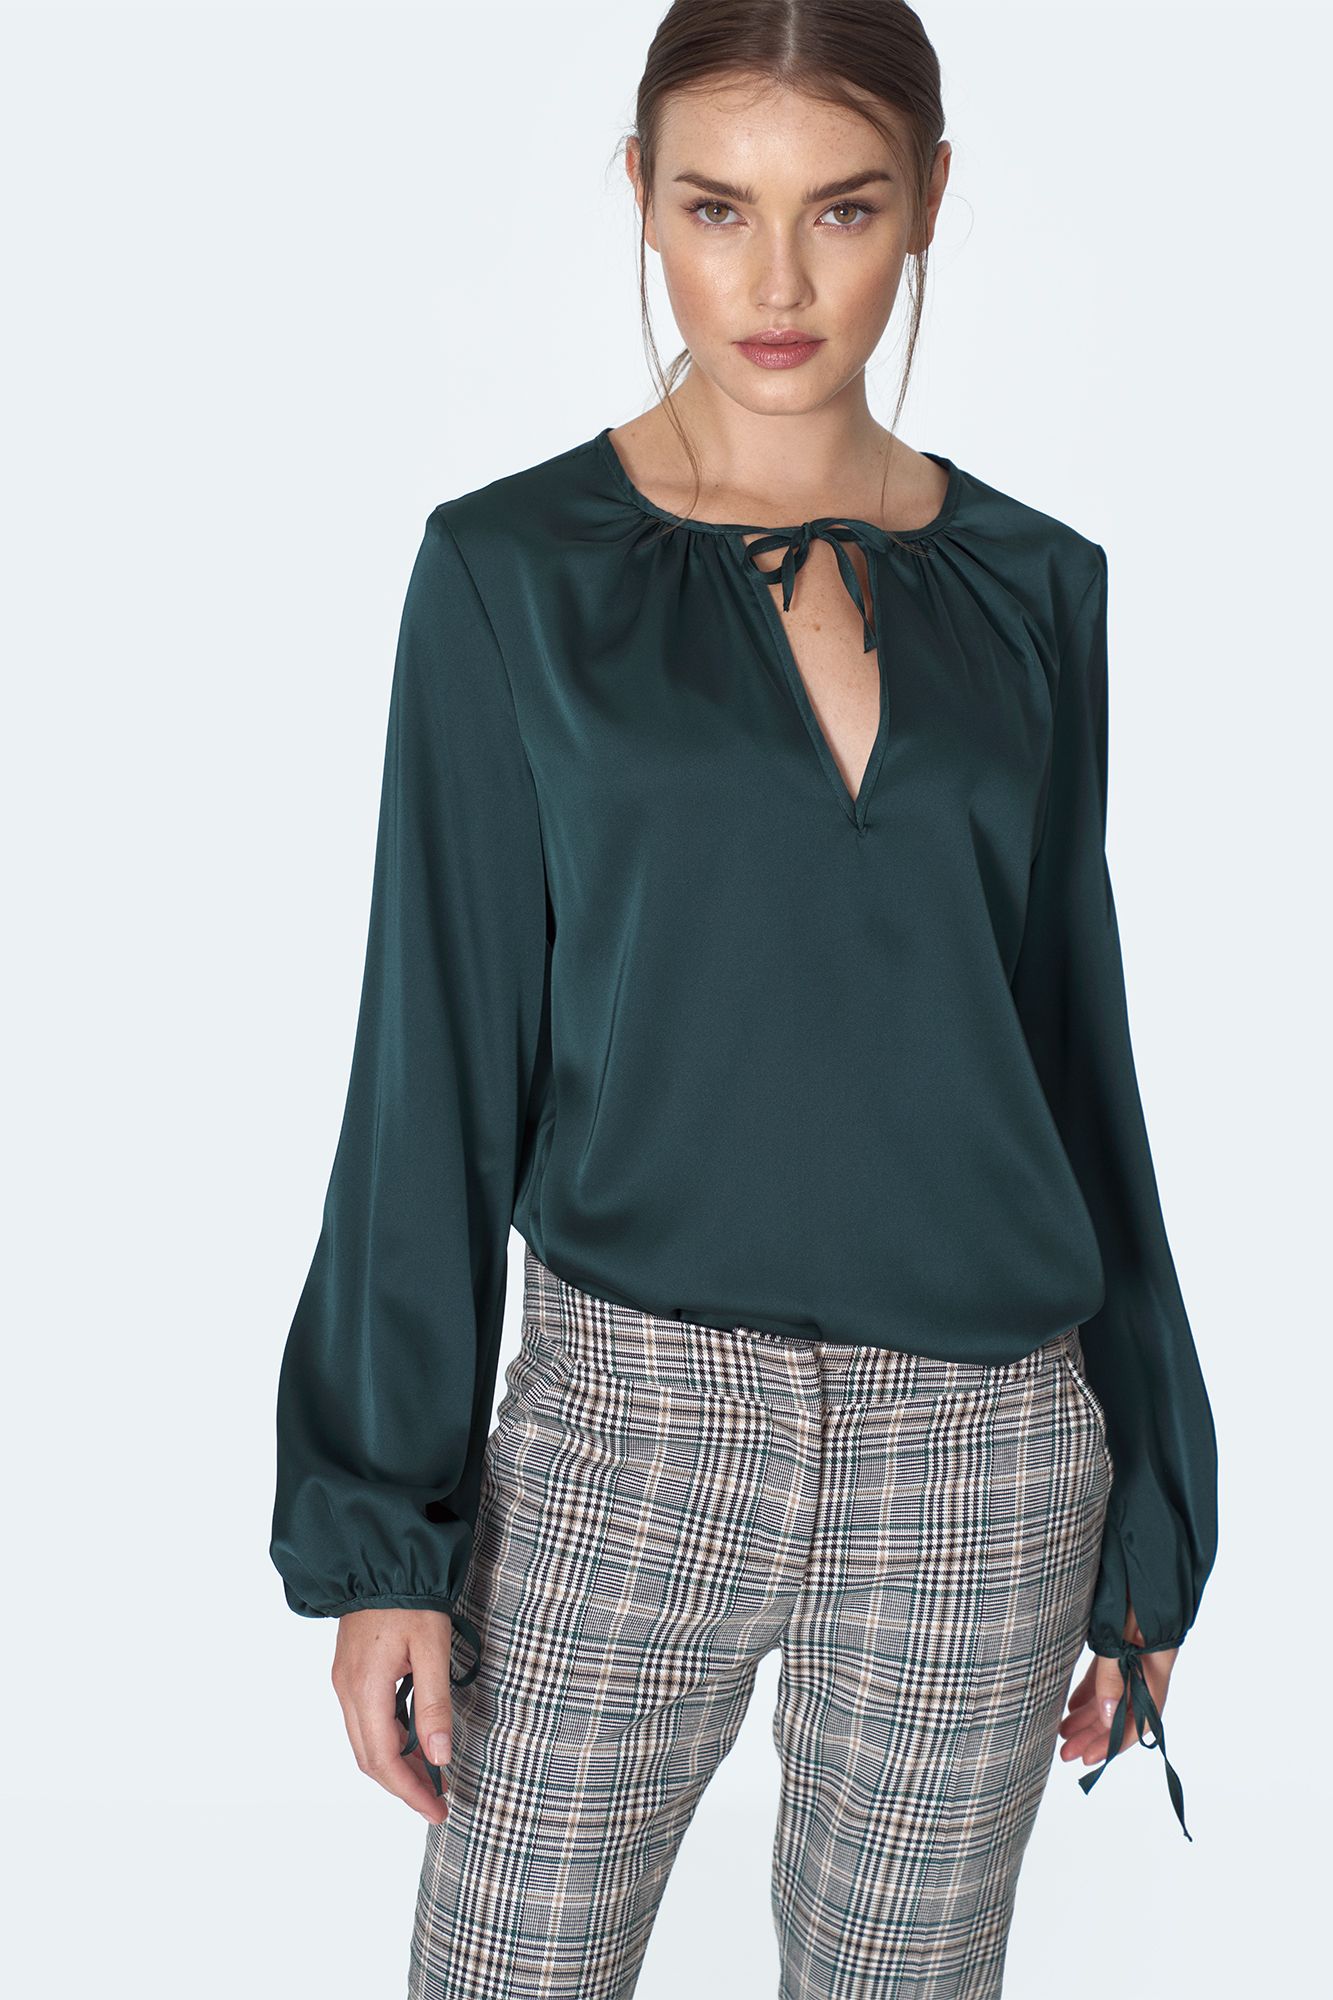 Classic Green Chequered Trousers